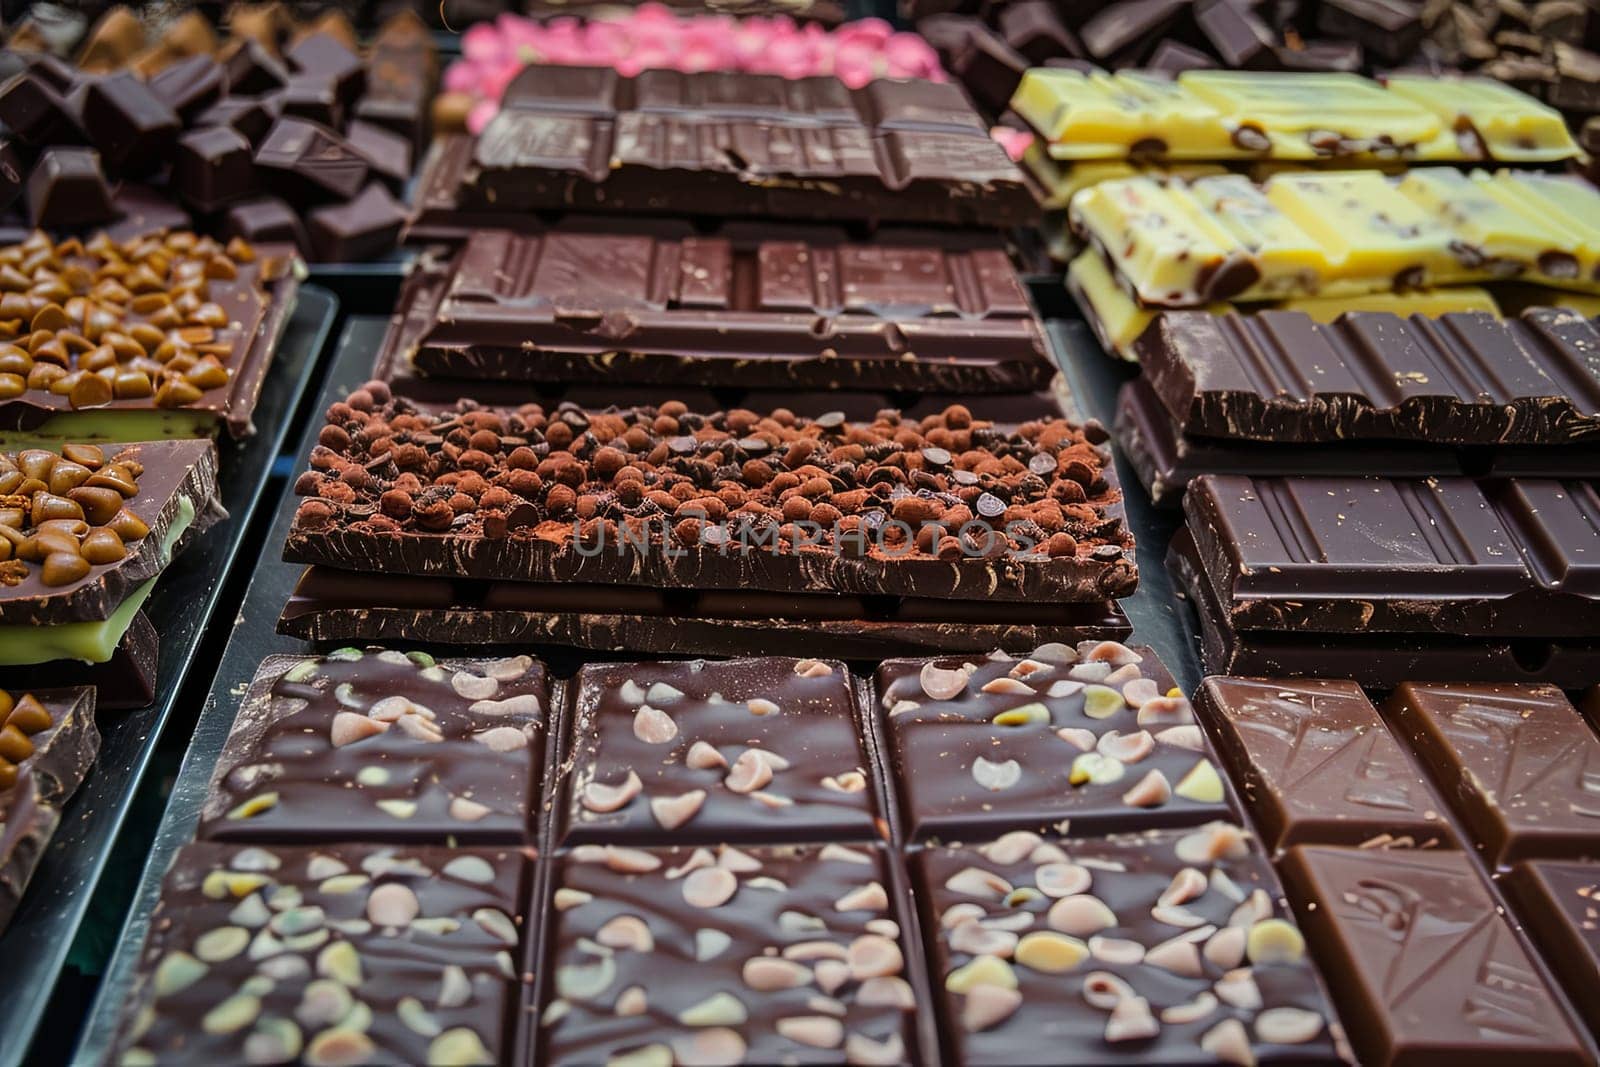 A display case showcasing a wide variety of chocolate bars in different flavors and types, with rich colors and high detail.